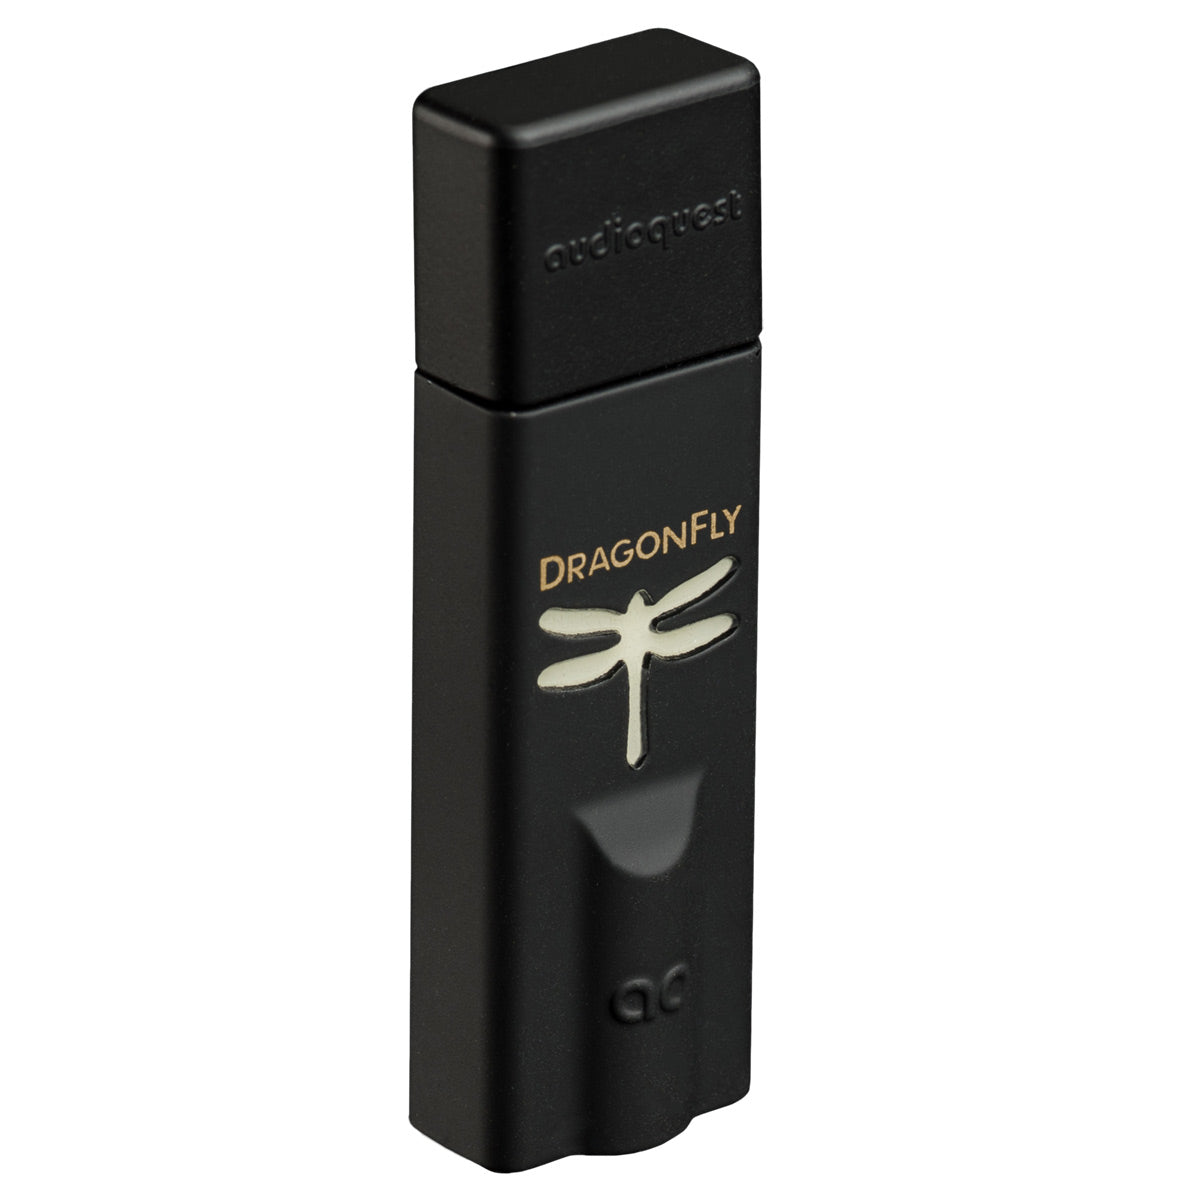 AudioQuest JitterBug FMJ USB 2.0 Power & Noise-Filter with DragonFly Black v1.5 USB Digital-to-Analog Converter